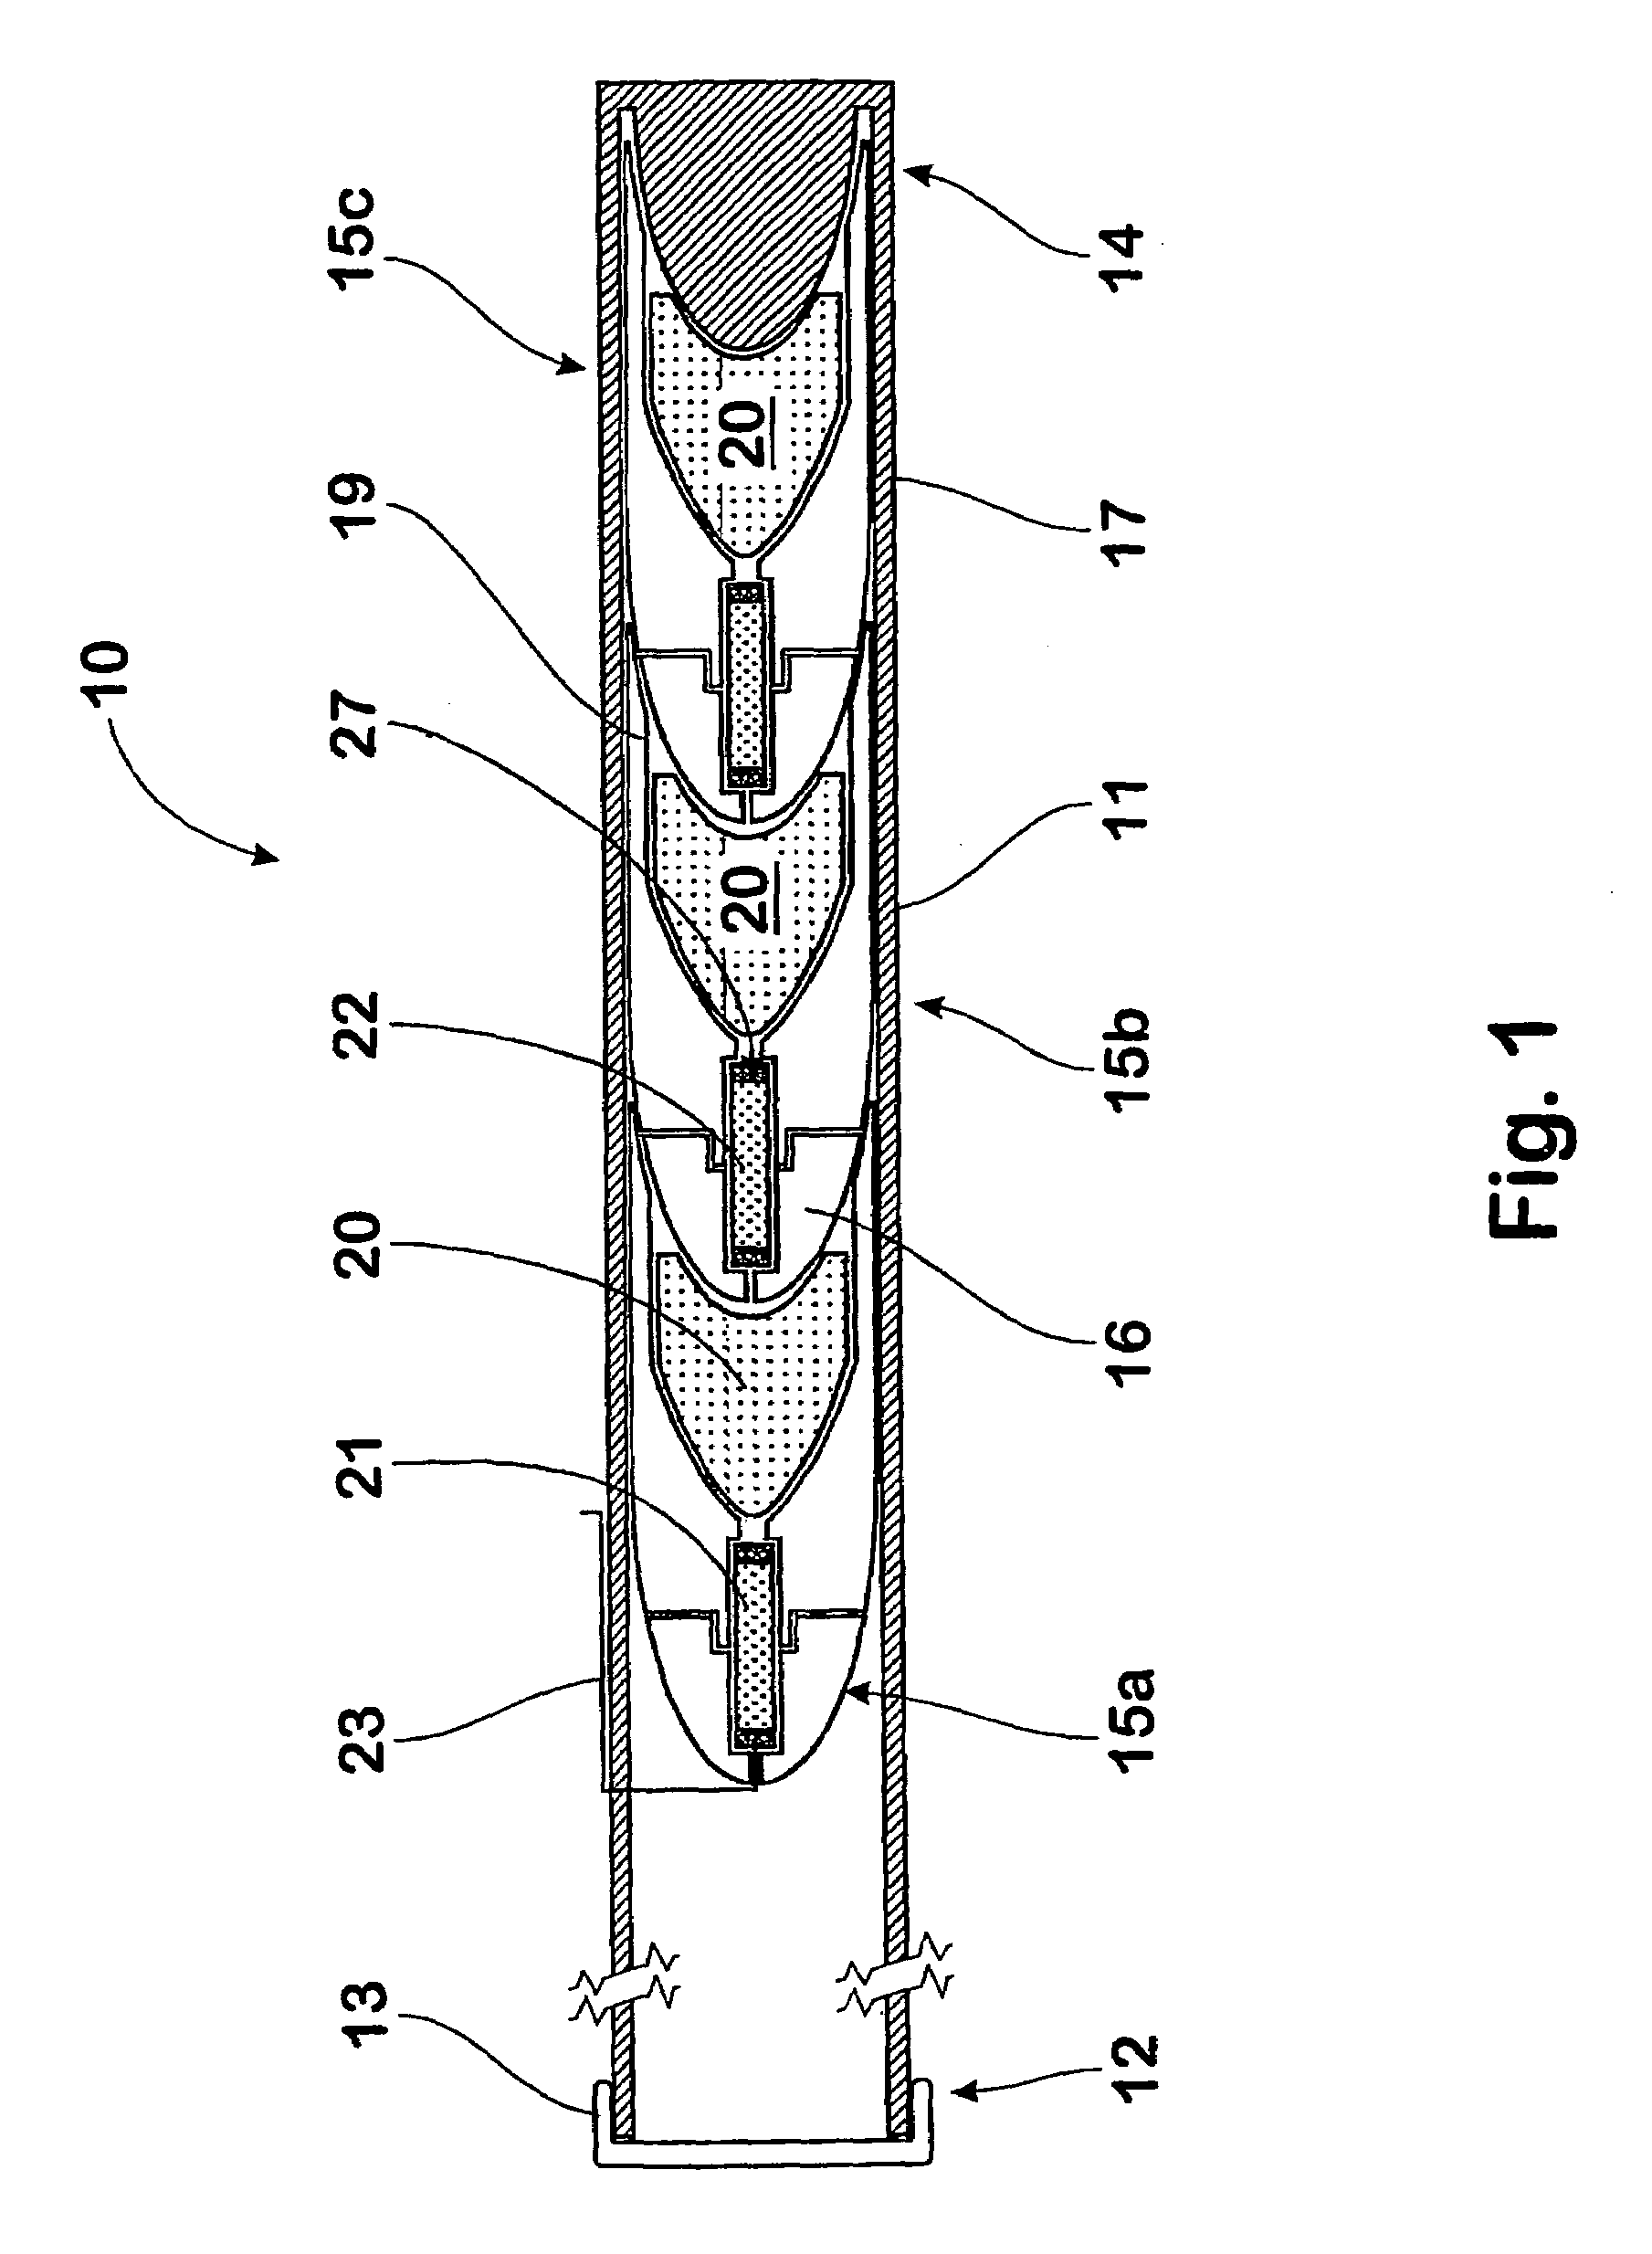 Ignition arrangement for stacked projectiles